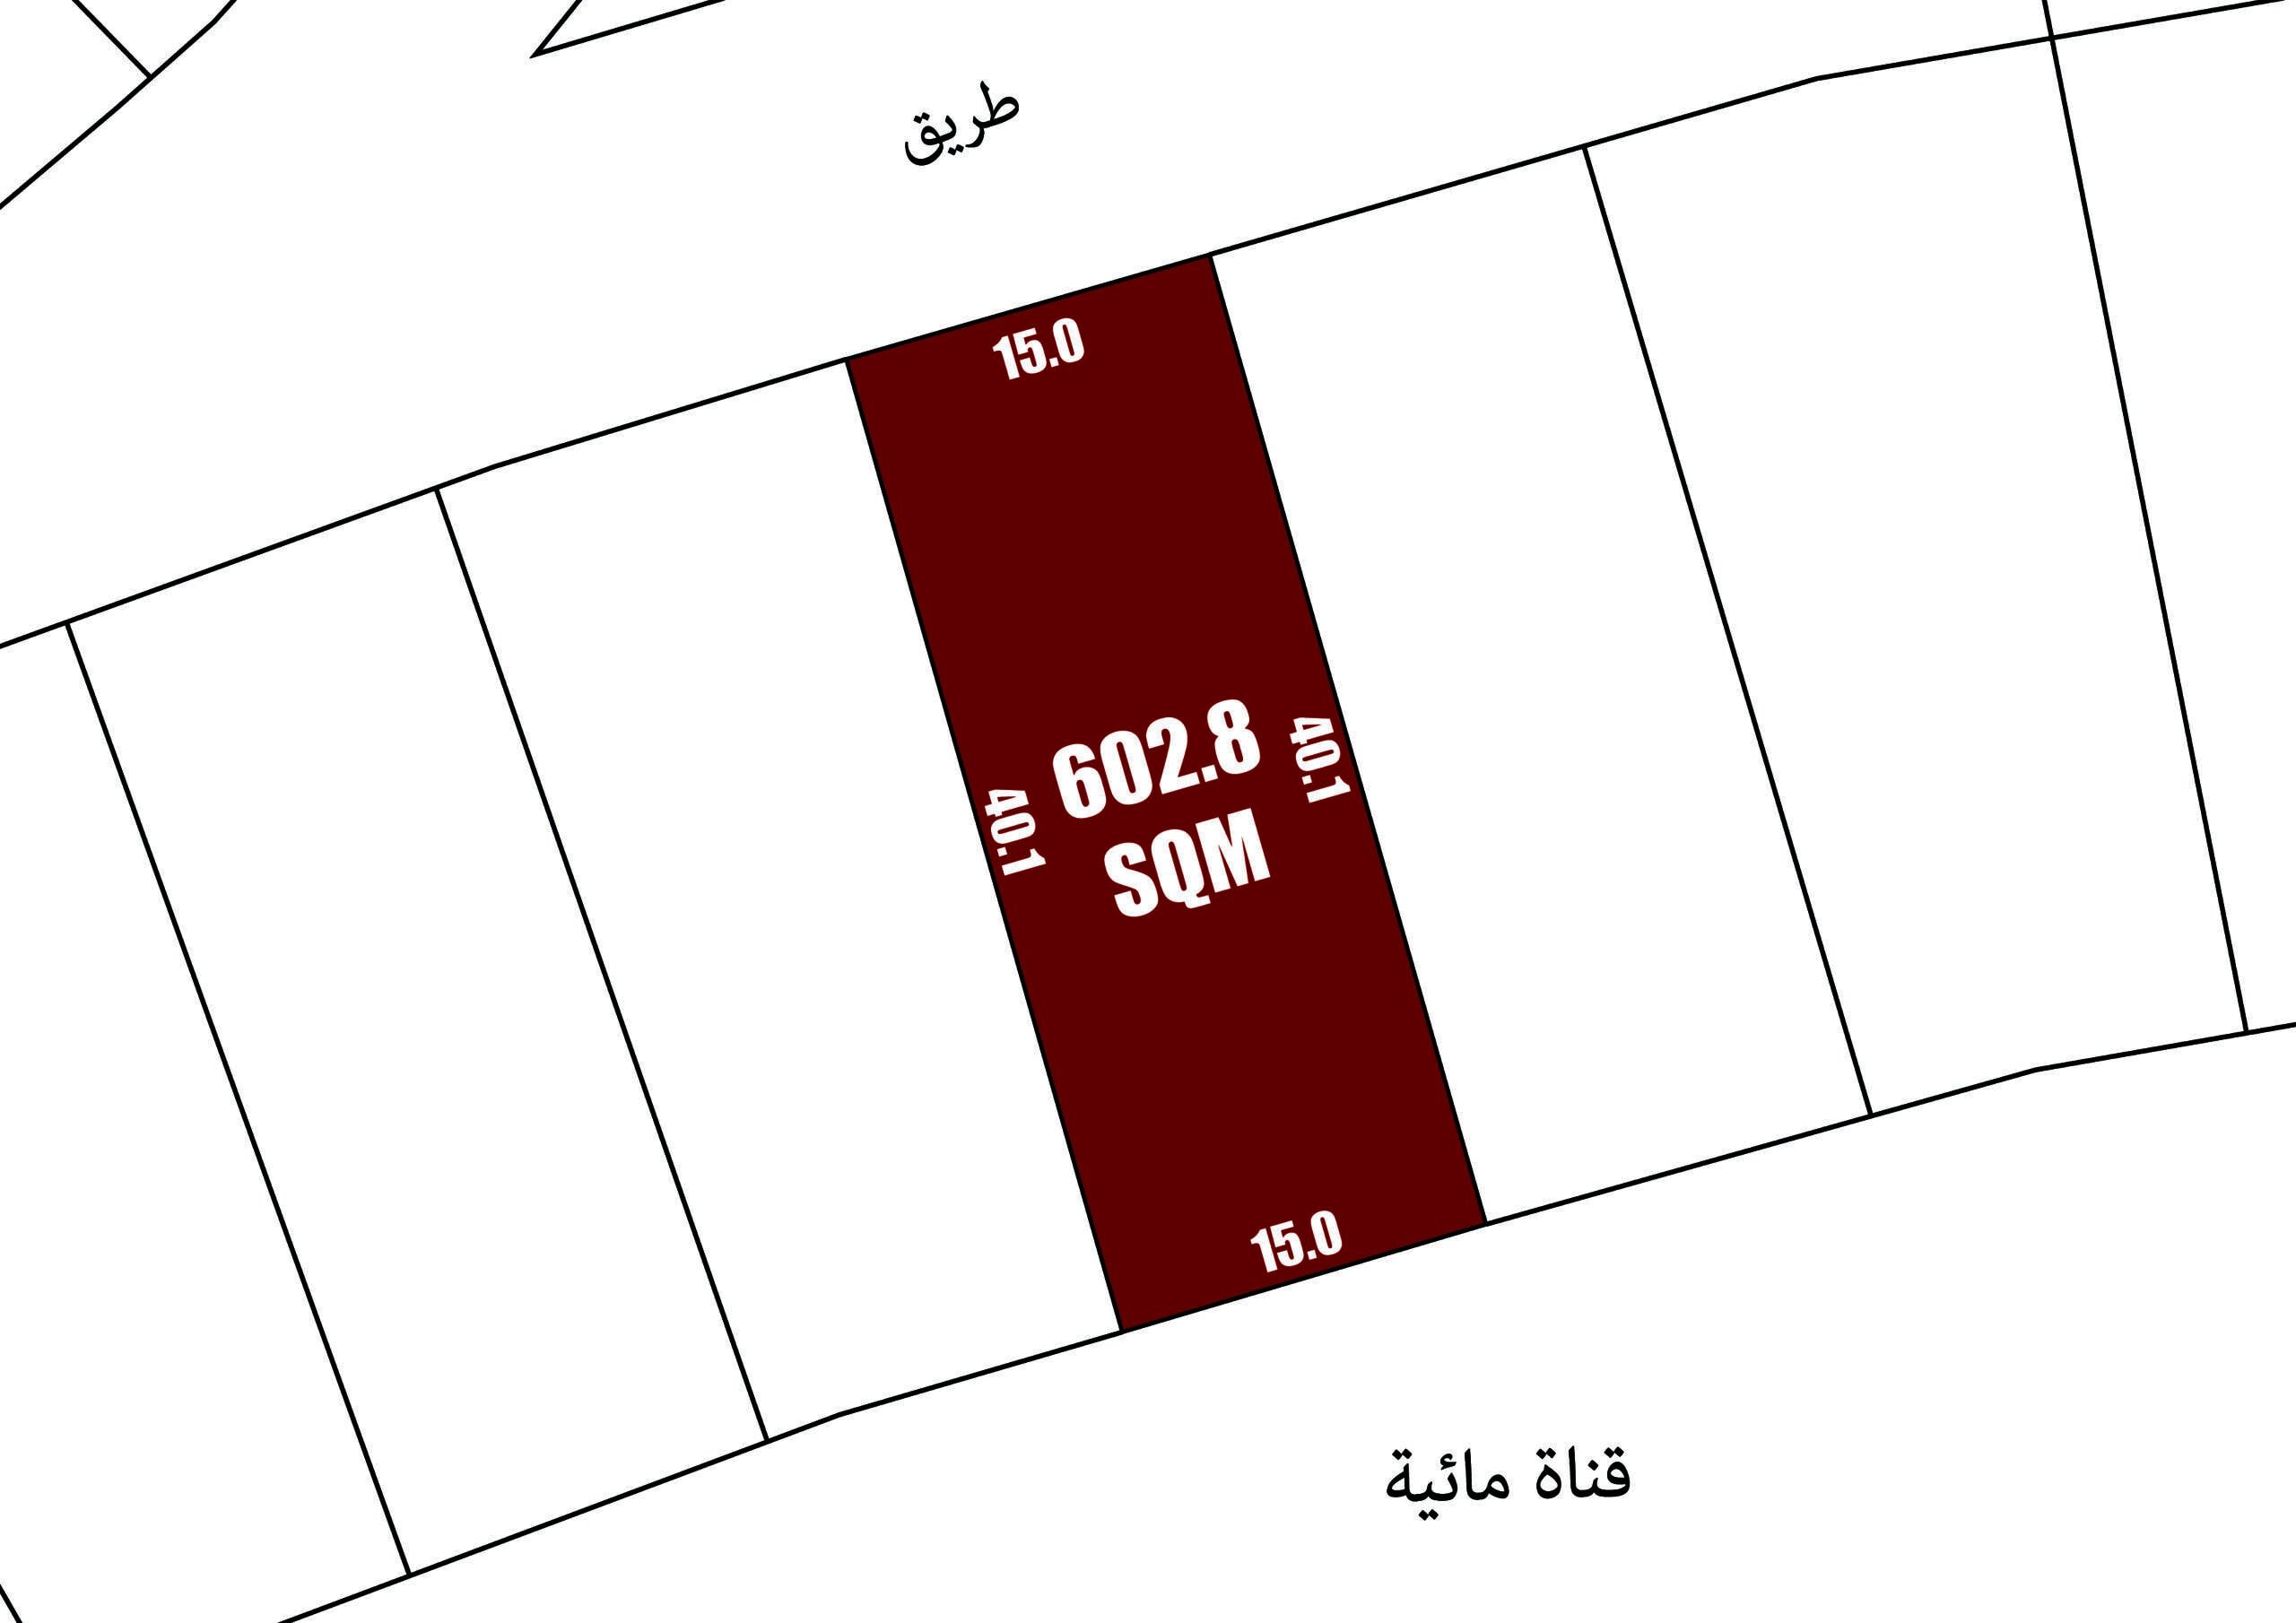 Auto Draft of land plot layout with a highlighted area of 602.8 square meters.